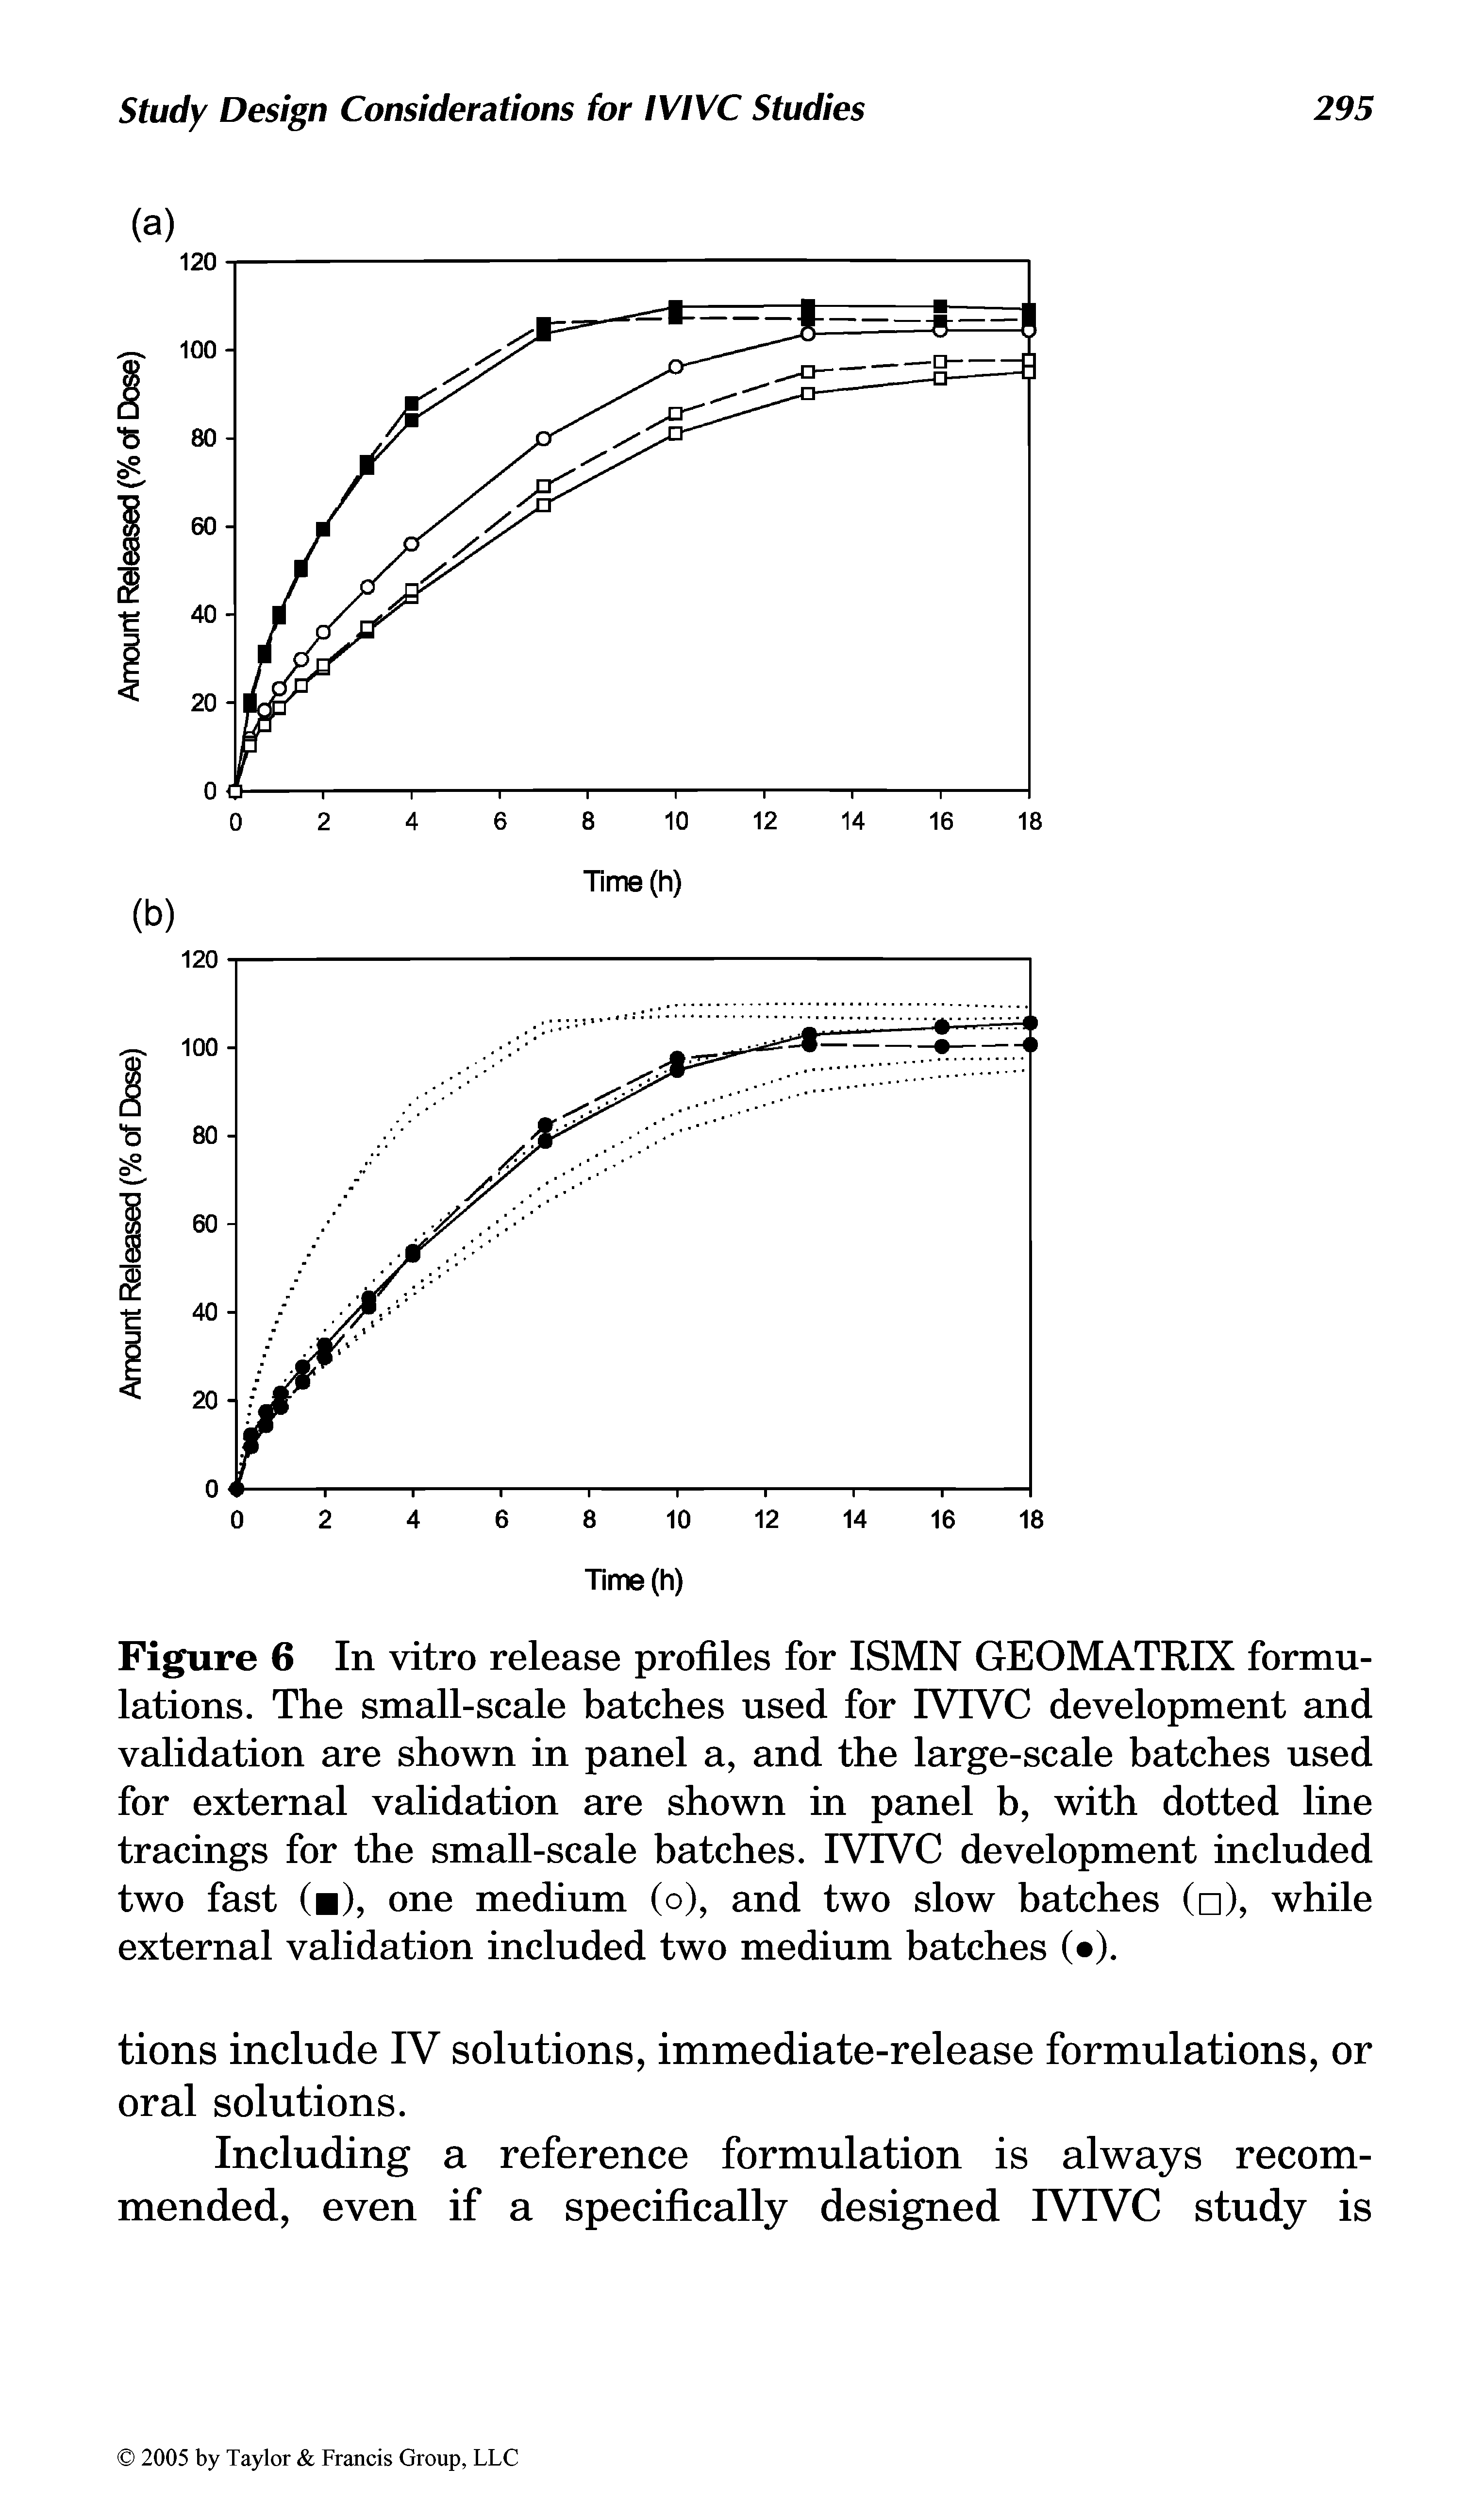 Figure 6 In vitro release profiles for ISMN GEOMATRIX formulations. The small-scale batches used for IVIVC development and validation are shown in panel a, and the large-scale batches used for external validation are shown in panel b, with dotted line tracings for the small-scale batches. IVIVC development included two fast ( ), one medium (o), and two slow batches ( ), while external validation included two medium batches ( ).